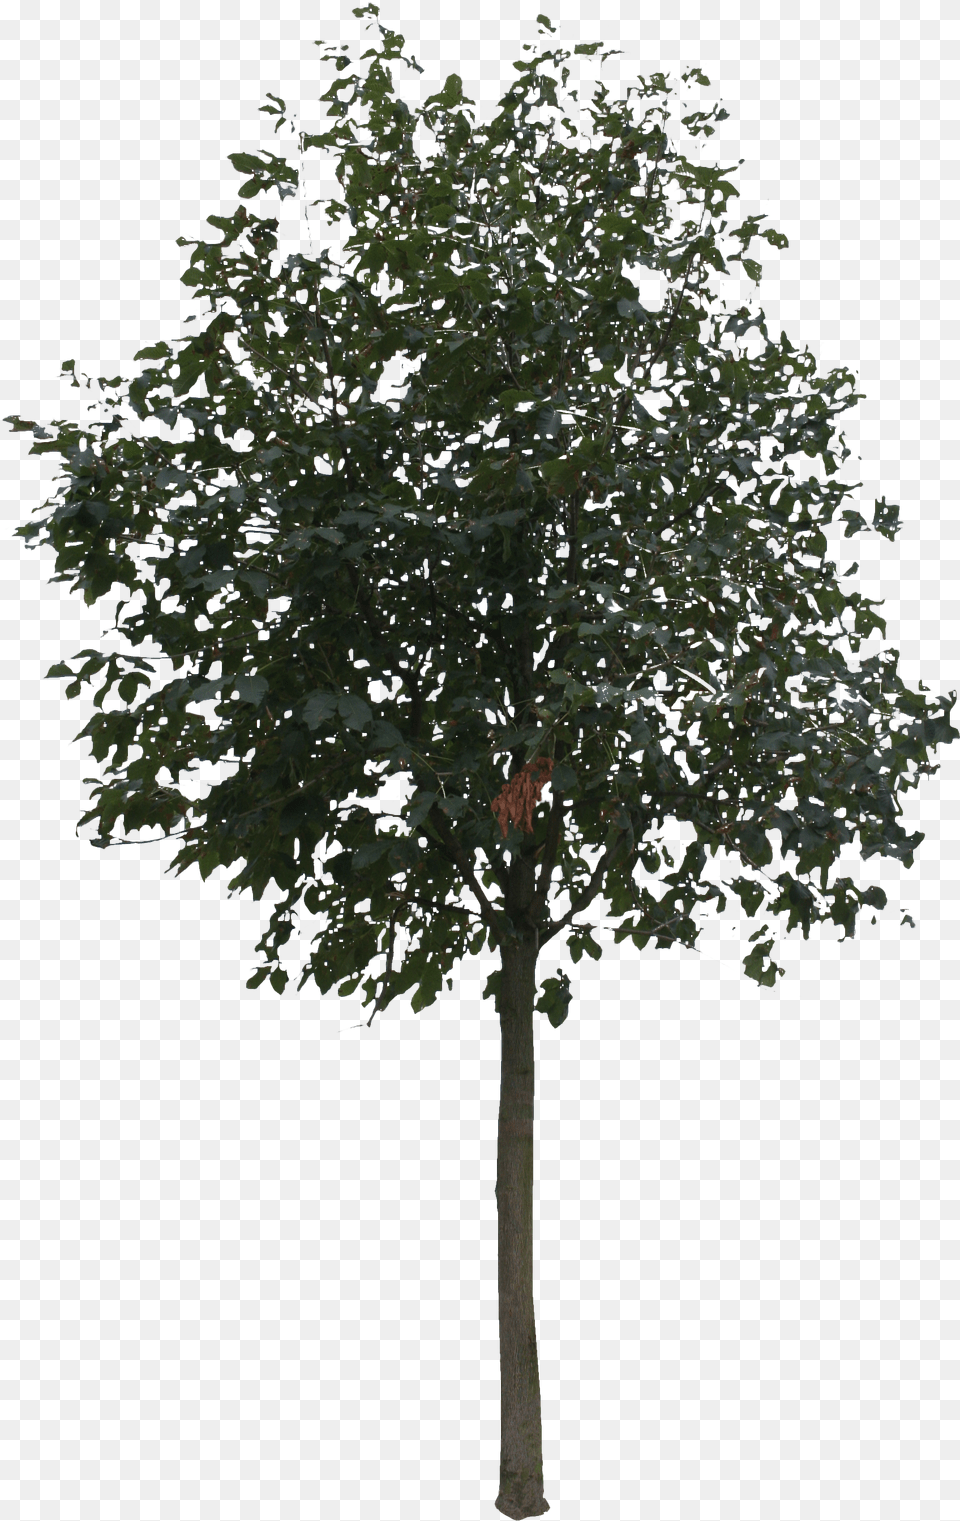 Tree Rendering Small Tree Cut Out, Maple, Oak, Plant, Sycamore Png